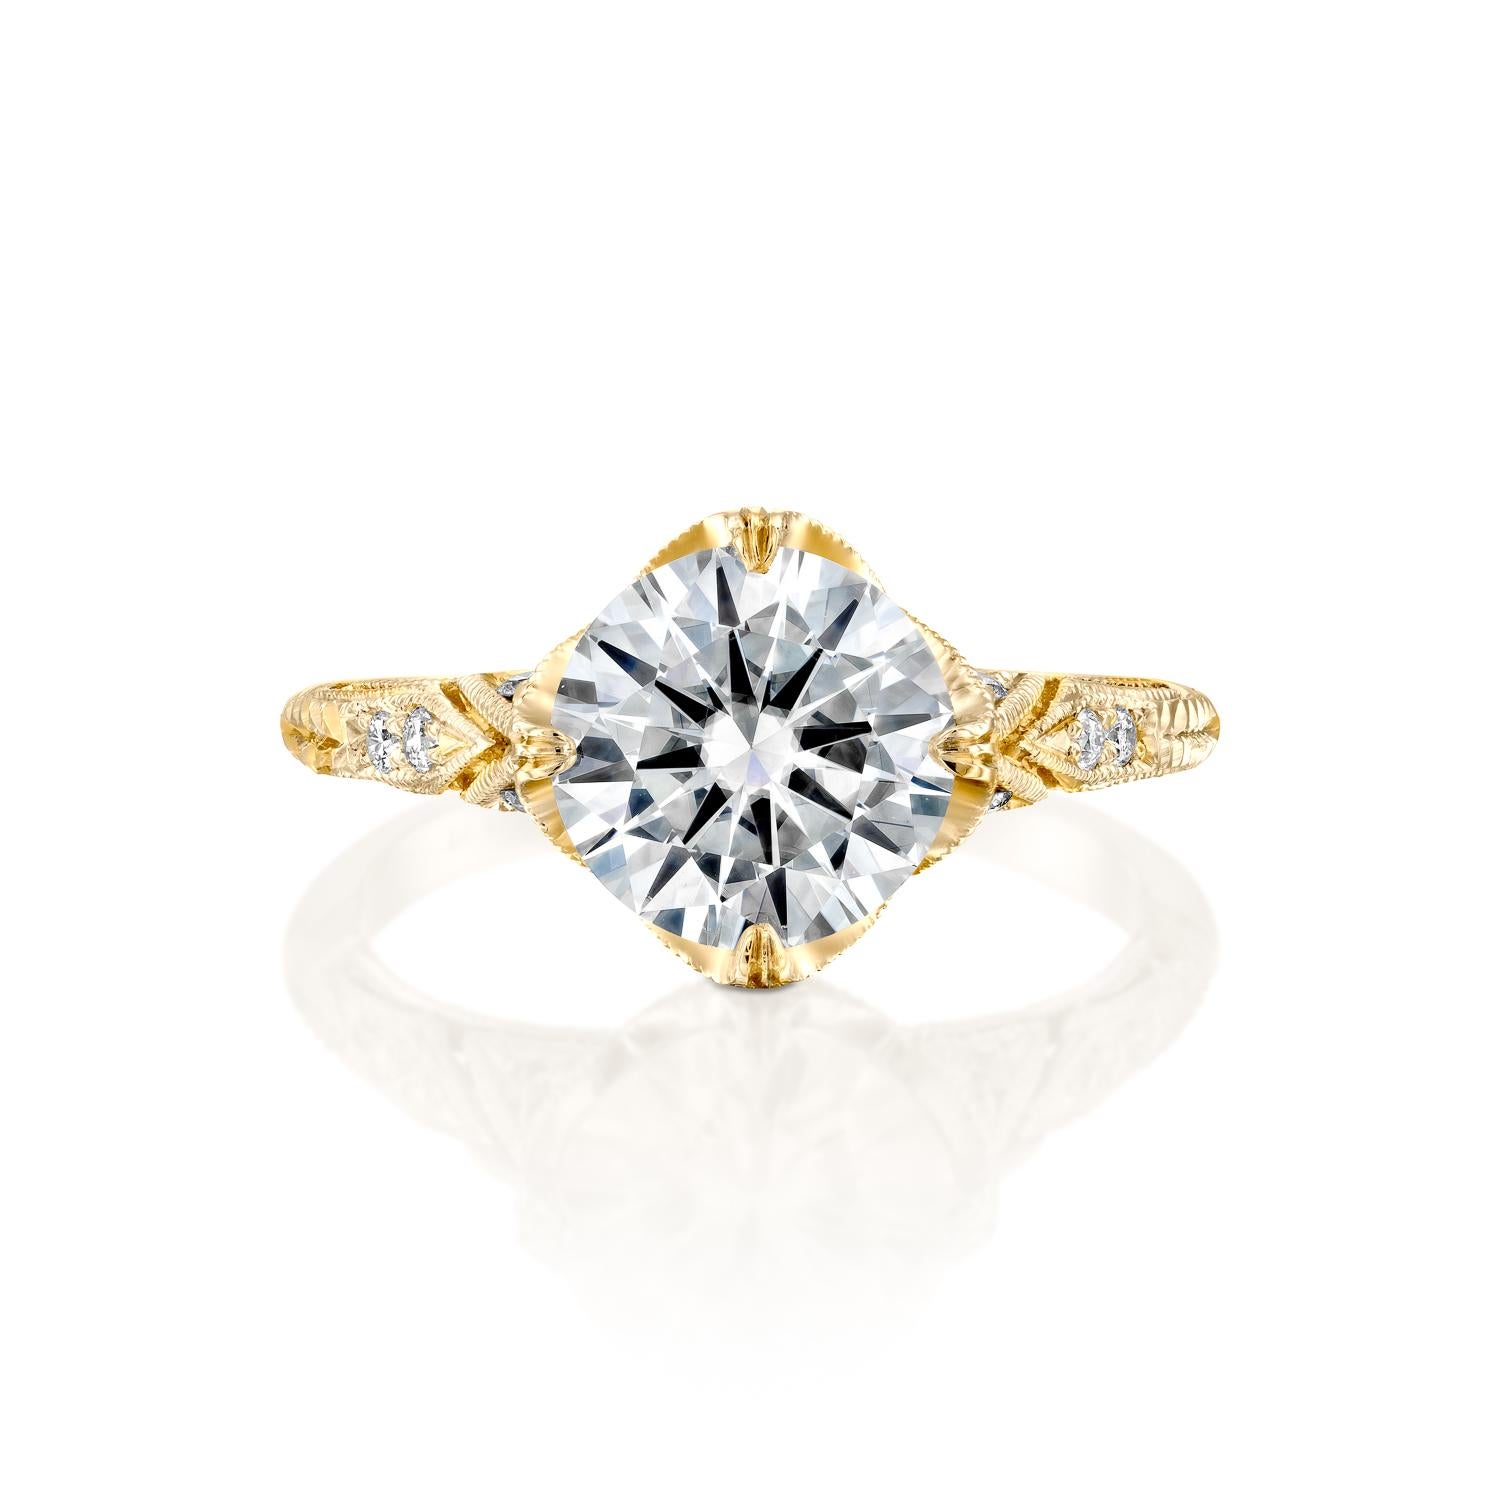 This gorgeous ring features a solitaire GIA certified diamond. Center stone is natural 2.5 carat, round shaped 100% eye clean natural diamond of F-G color and VS2-SI1 clarity and it is surrounded by smaller natural round diamonds of 0.2 total carat